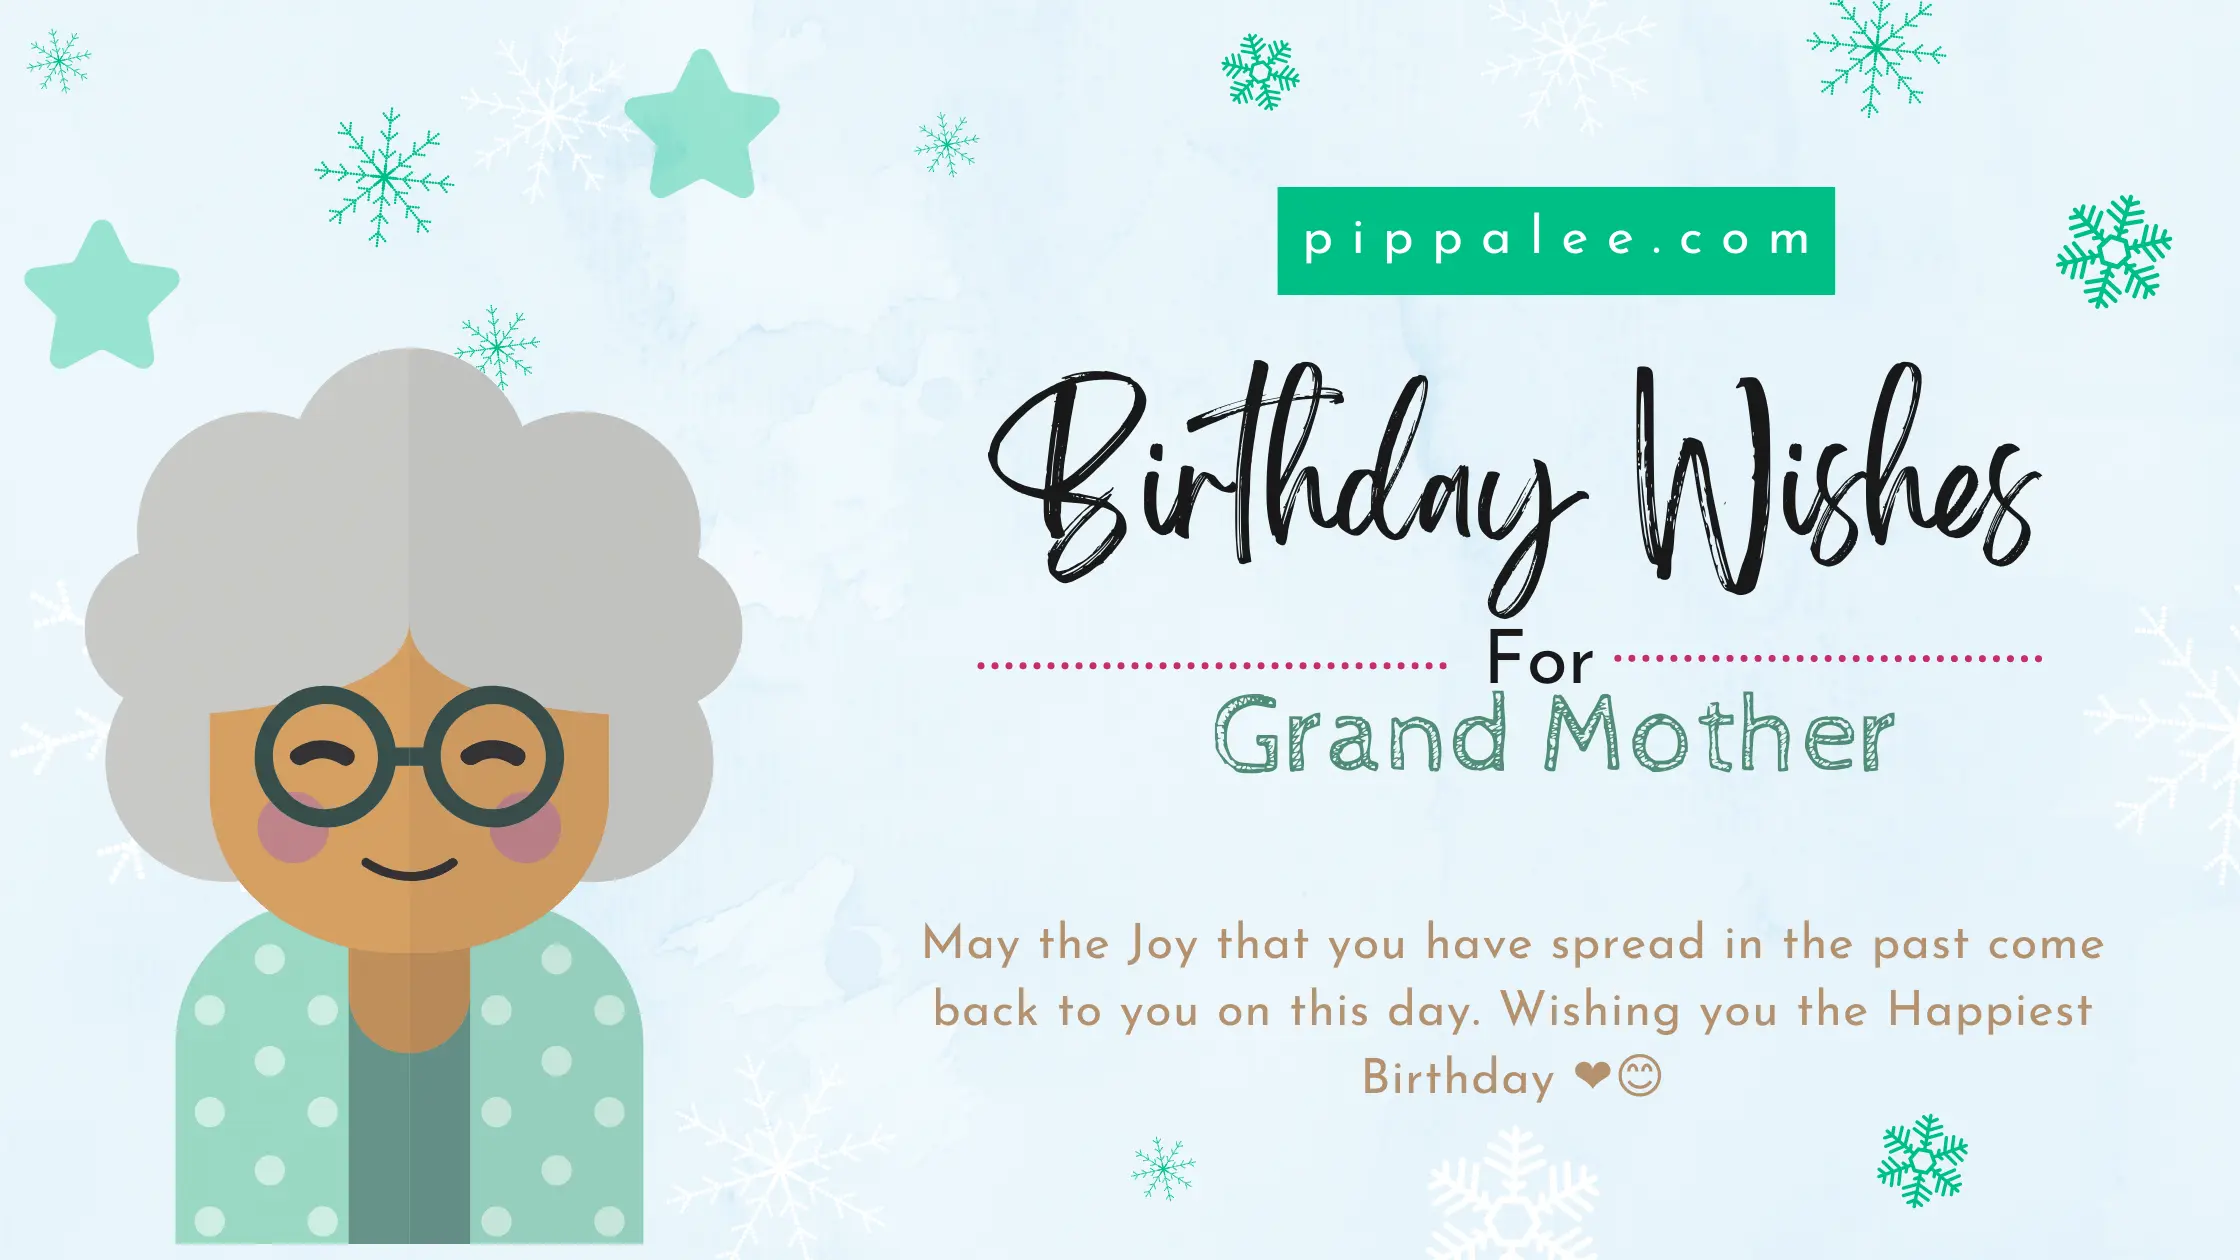 Birthday Wishes For Grand Mother - Warm Wishes